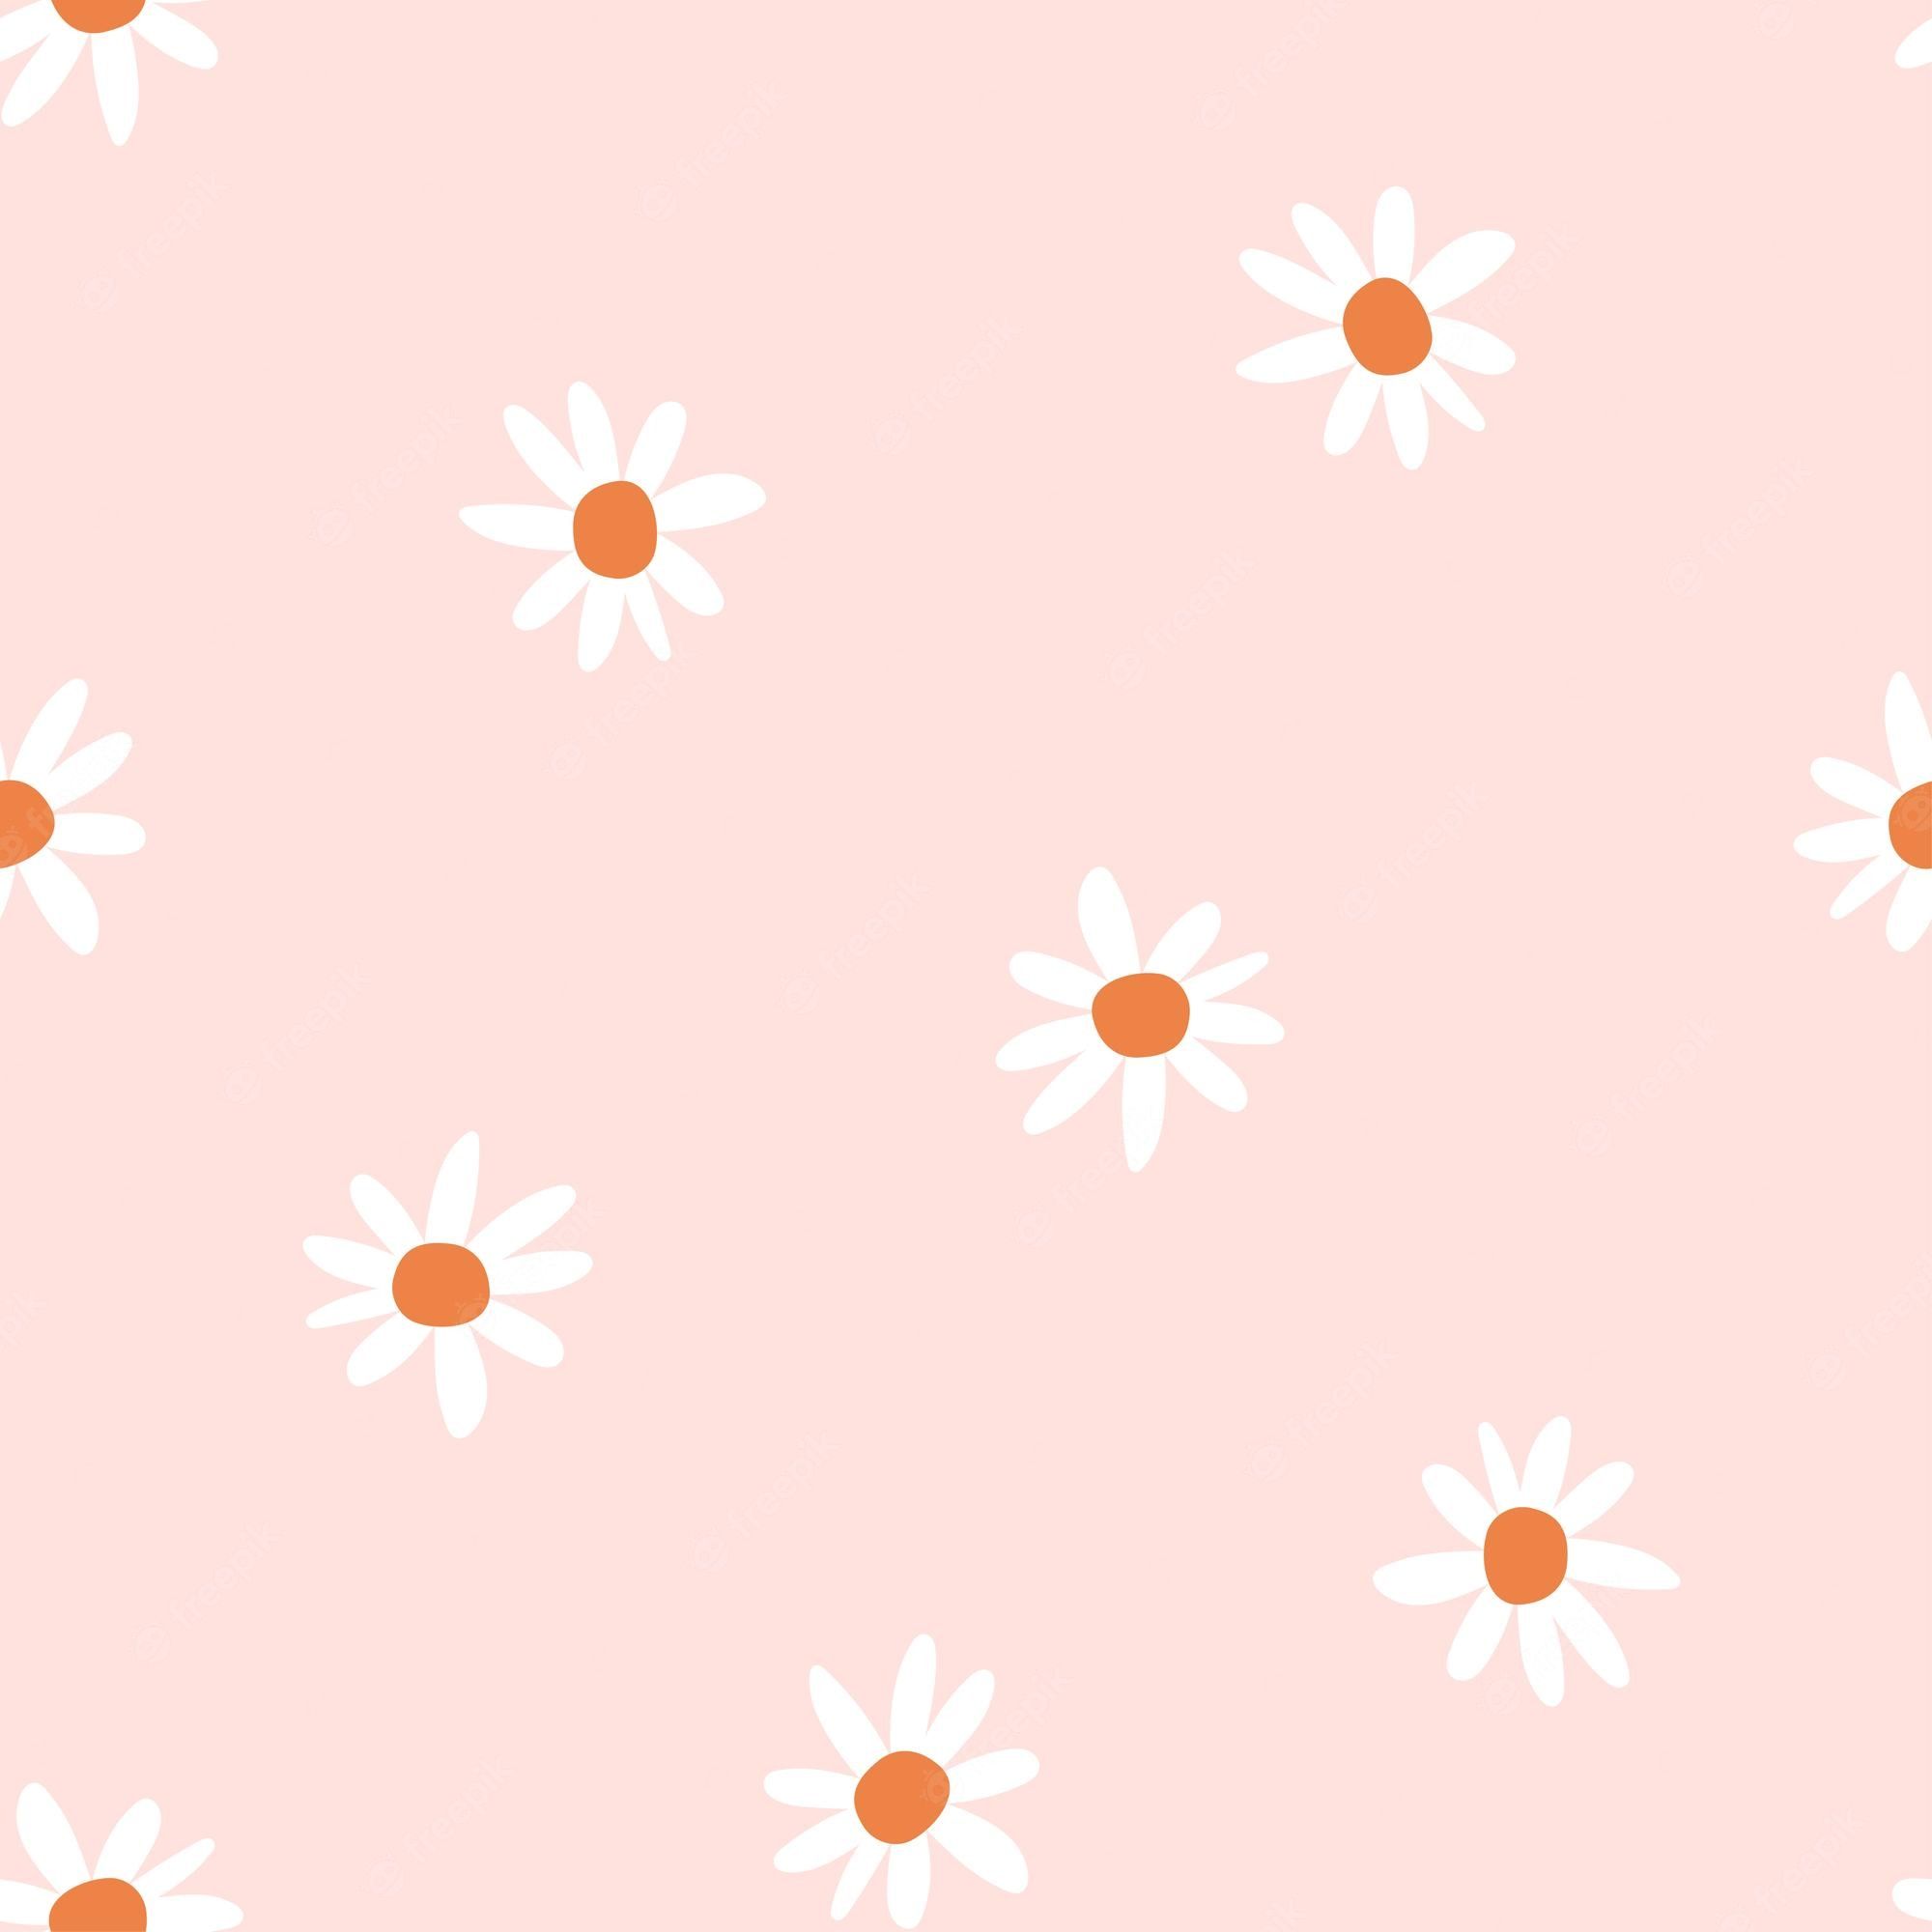 Cute aesthetic wallpaper Vectors & Illustrations for Free Download